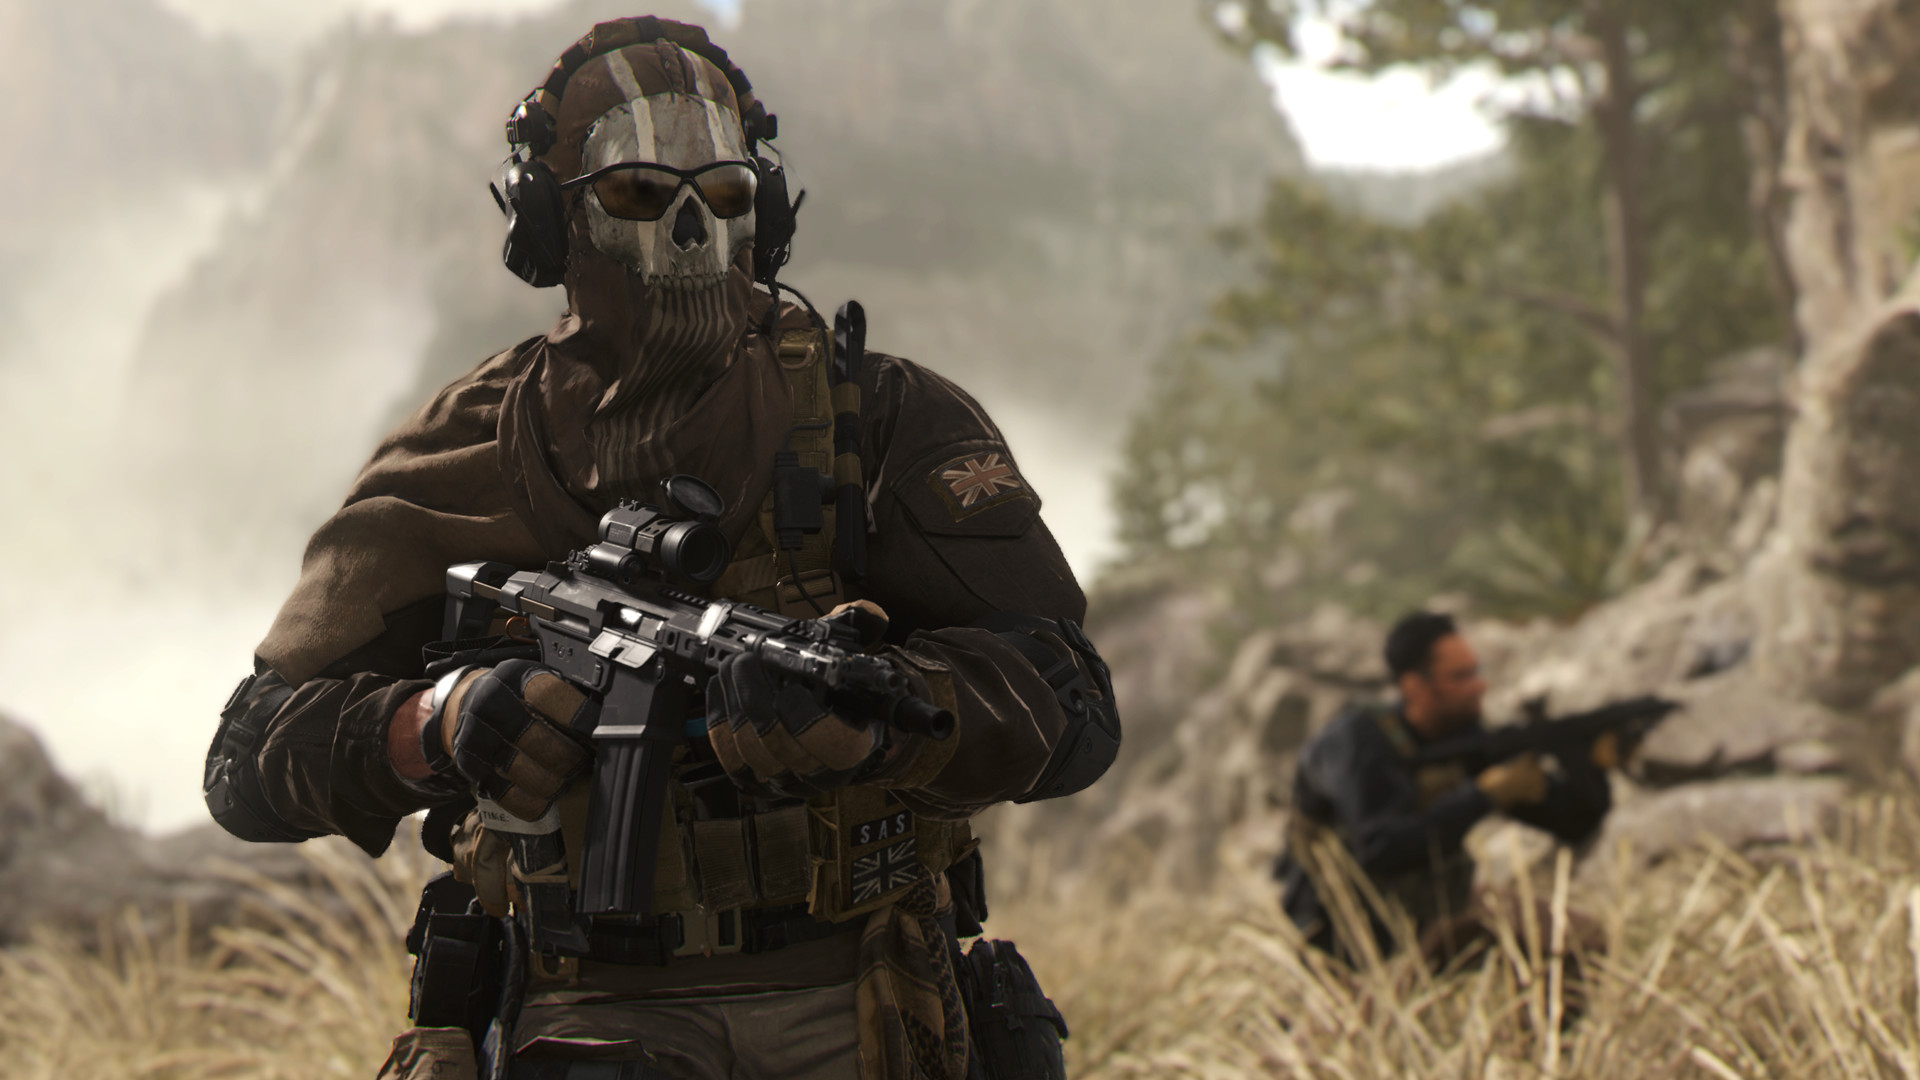 The Quarry and Call of Duty: Modern Warfare II entered the Steam sales chart